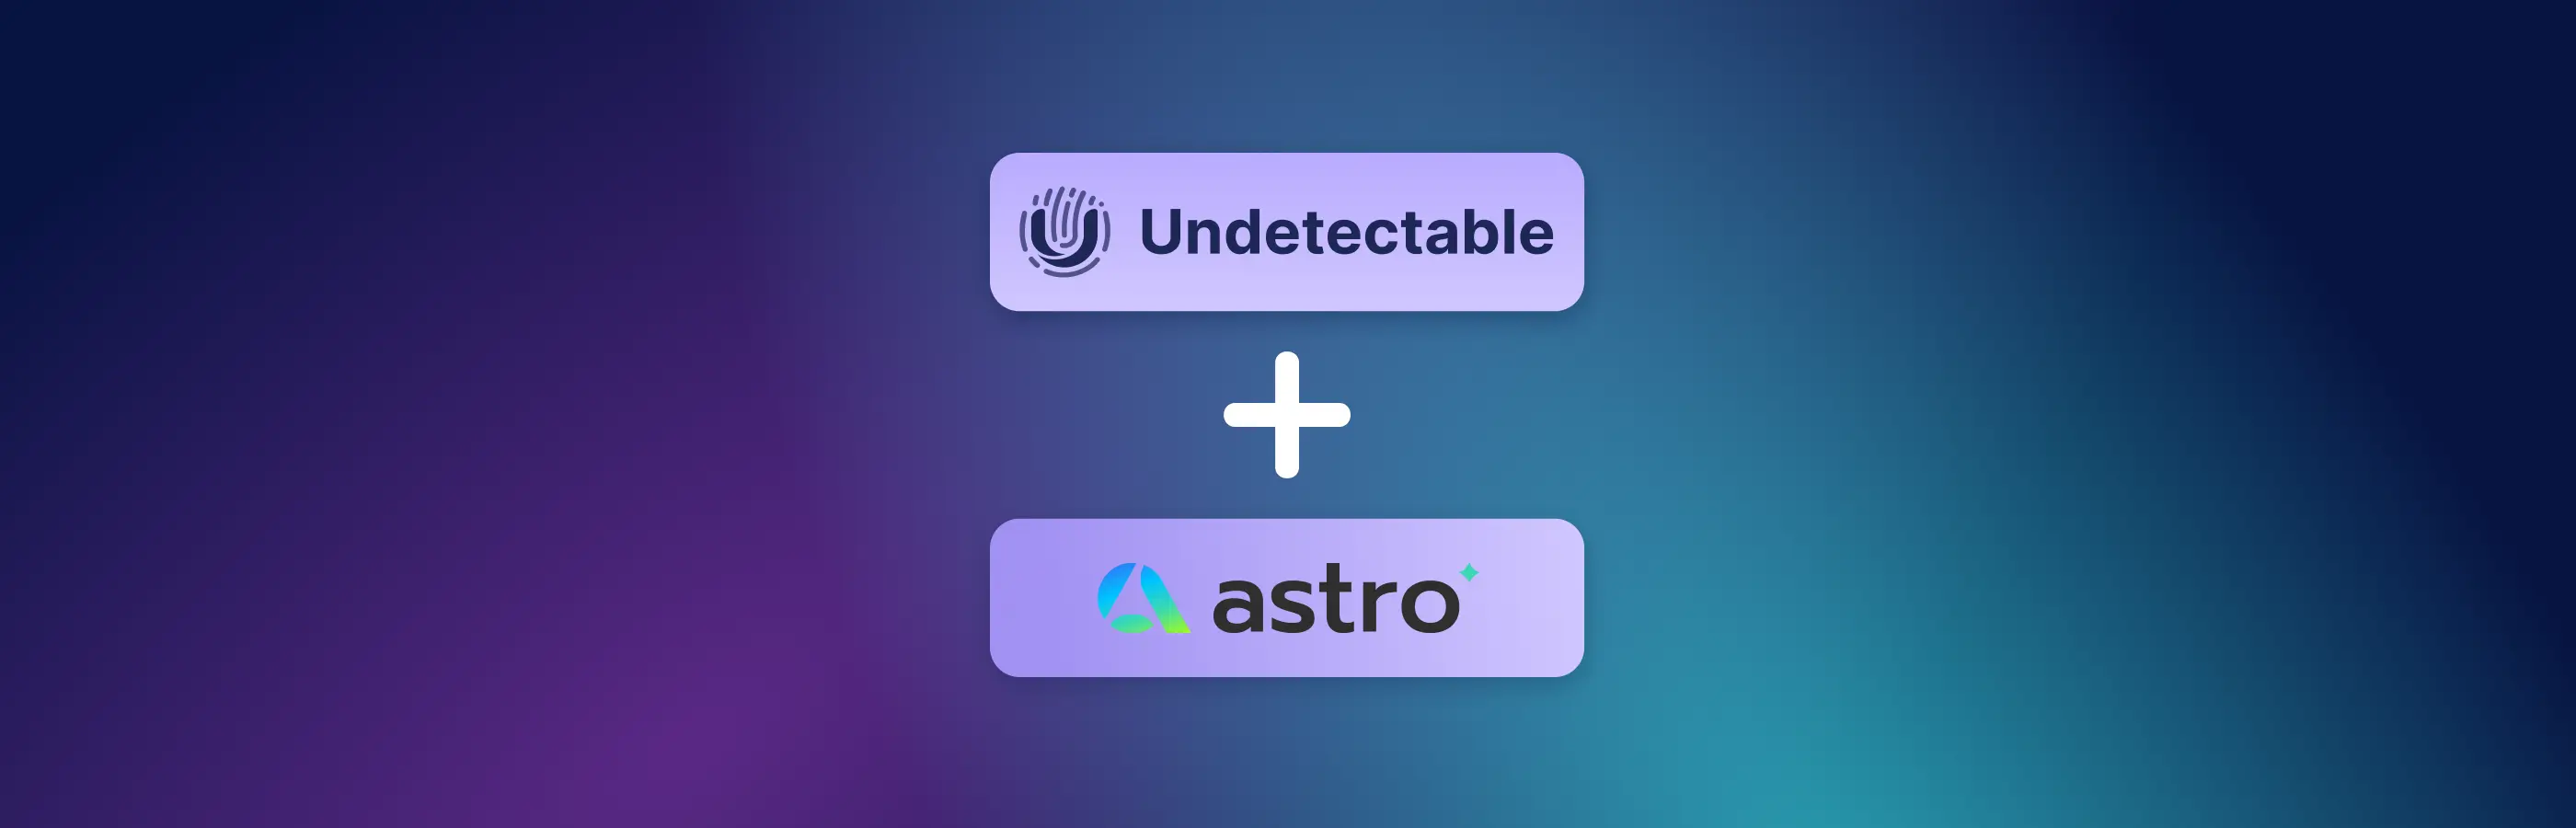 How to use AstroProxy with Undetectable